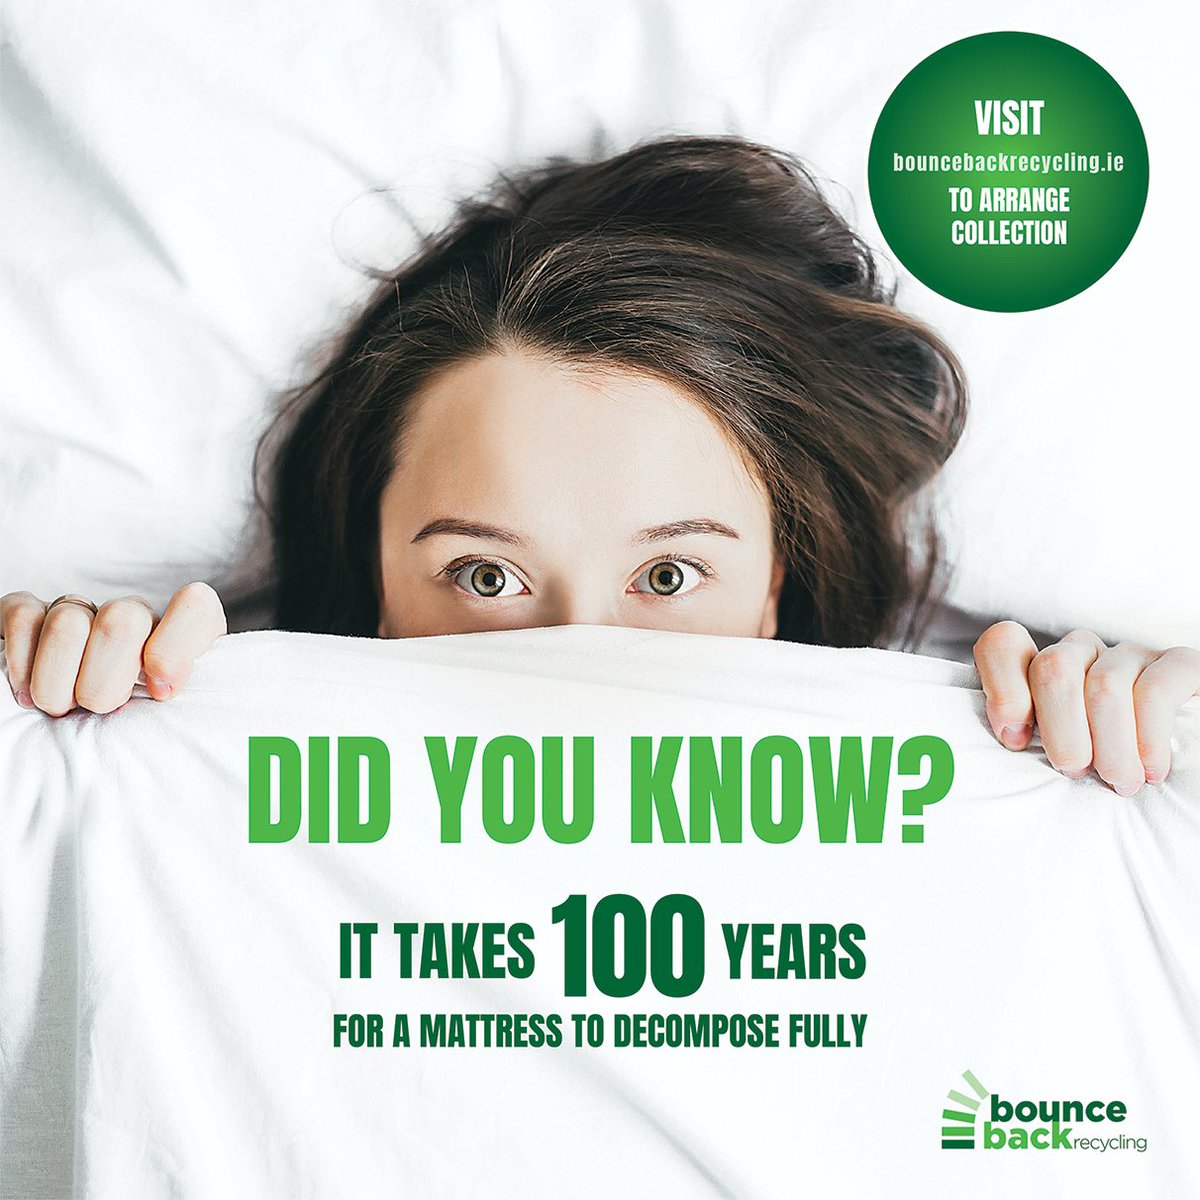 It takes 100 years for a #mattress  to decompose fully - it takes five minutes to book a collection spot through our website! Get in touch and #doyourbit for a greener tomorrow!
#BBR #recycling #GoGreen #doyourbit  #supportlocal  #environment 
#socialenterprise #recyclingireland